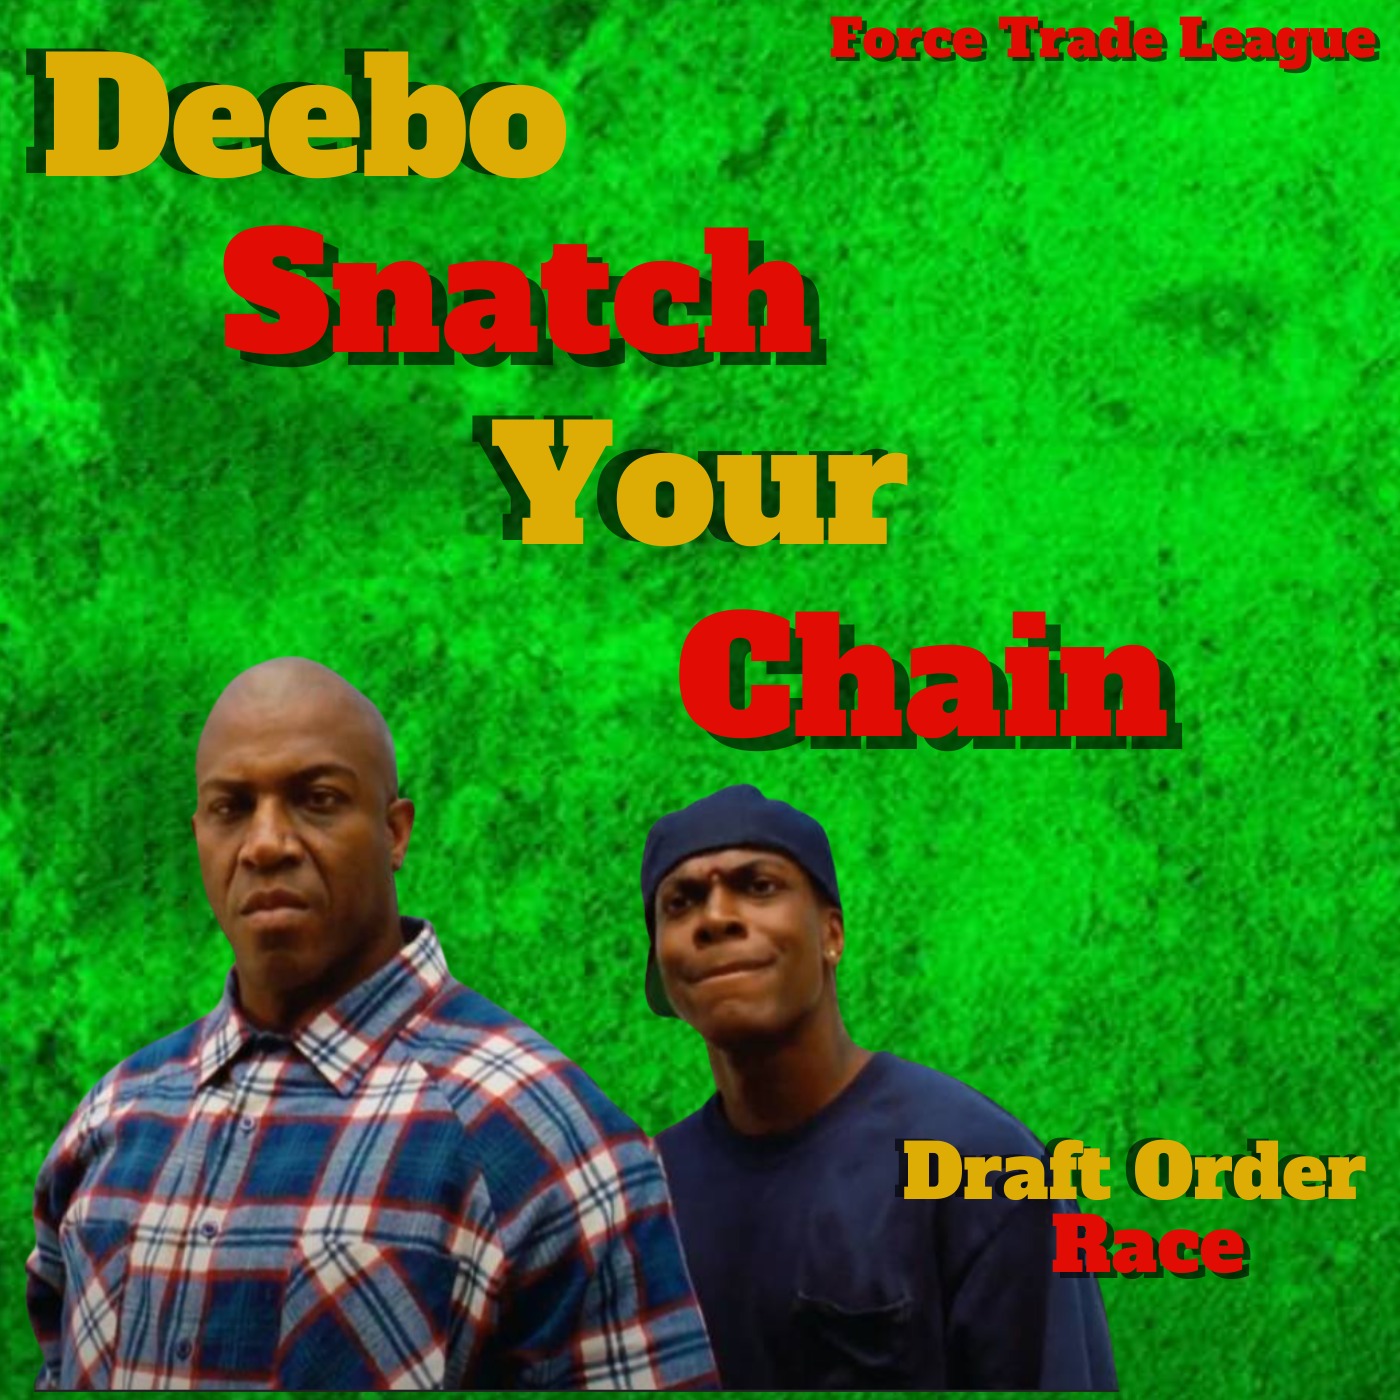 Deebo Snatch Your Chain League Draft Order Race, Force Trade League